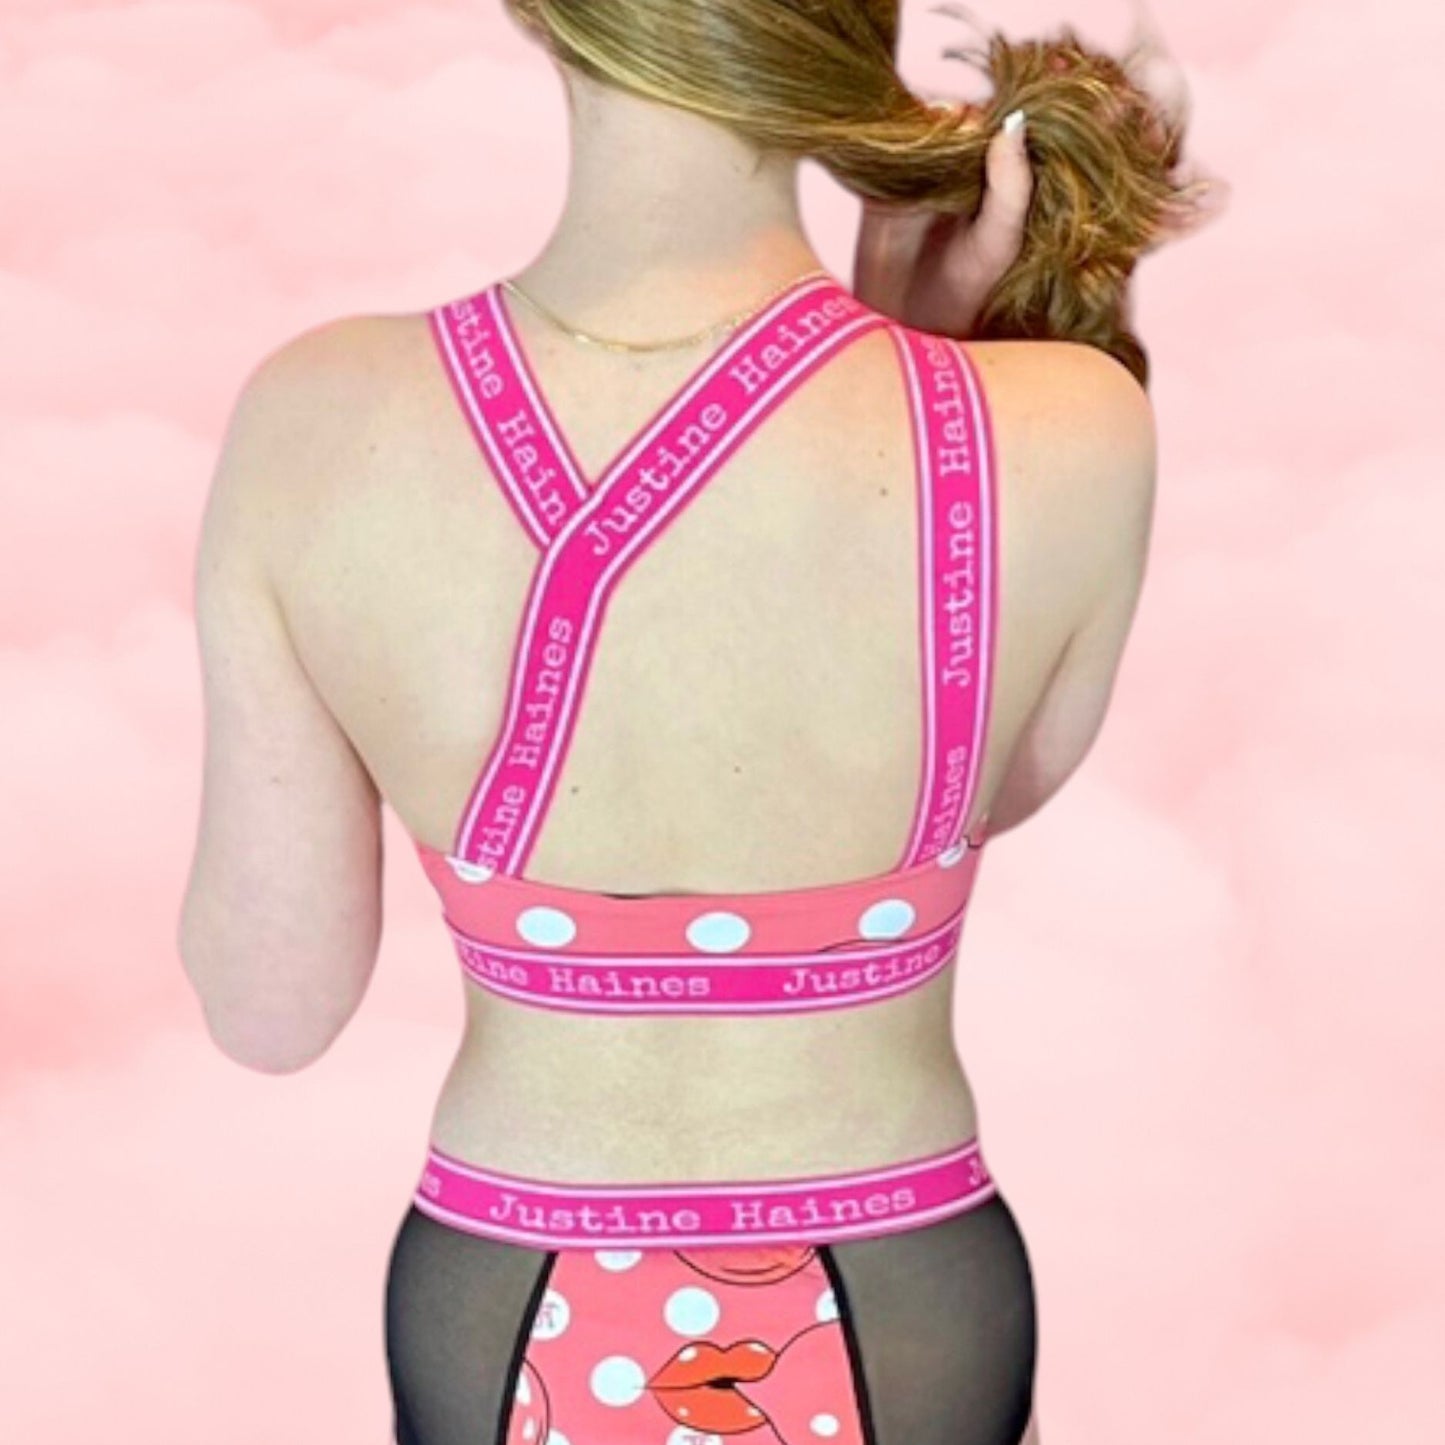 https://www.justinehaines.com/products/copy-of-full-coverage-t-back-racer-sports-bra-in-pink-bubble-gum-1